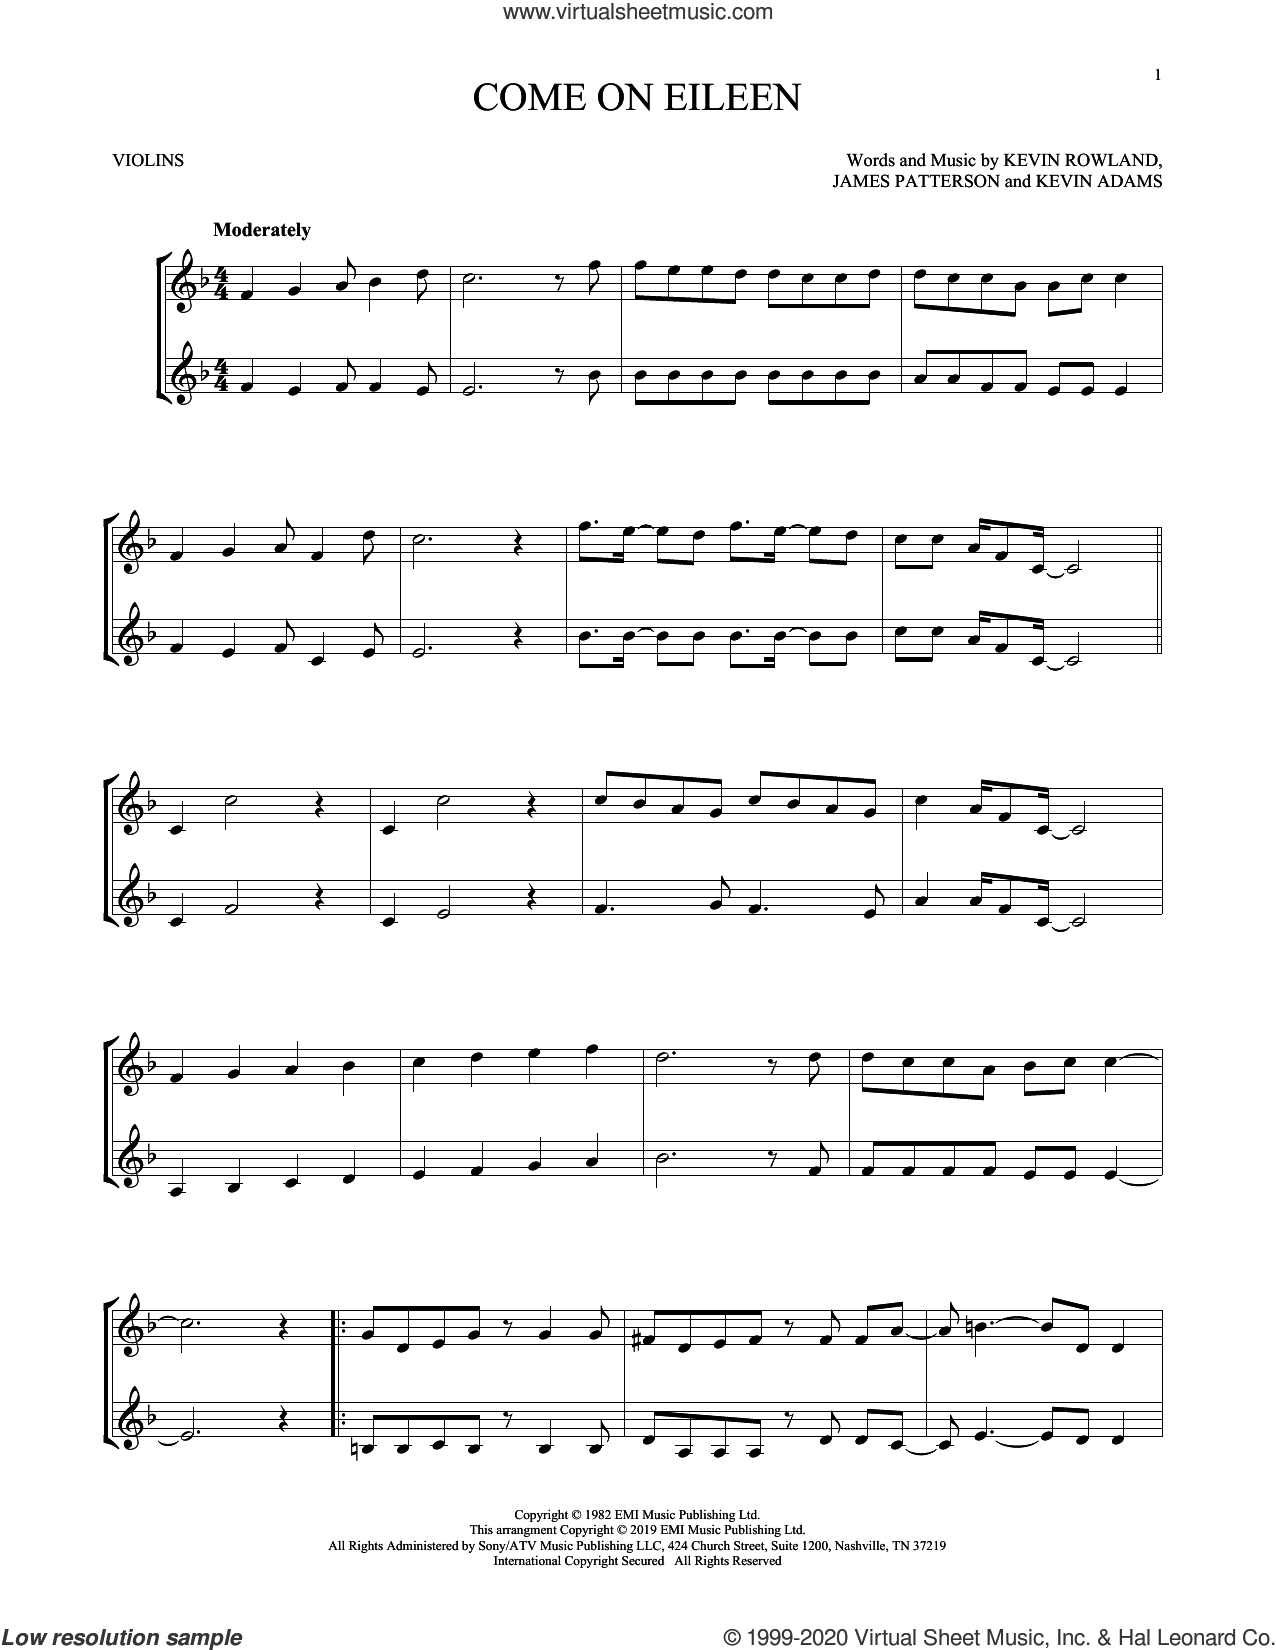 Come On Eileen sheet music for two violins (duets, duets)